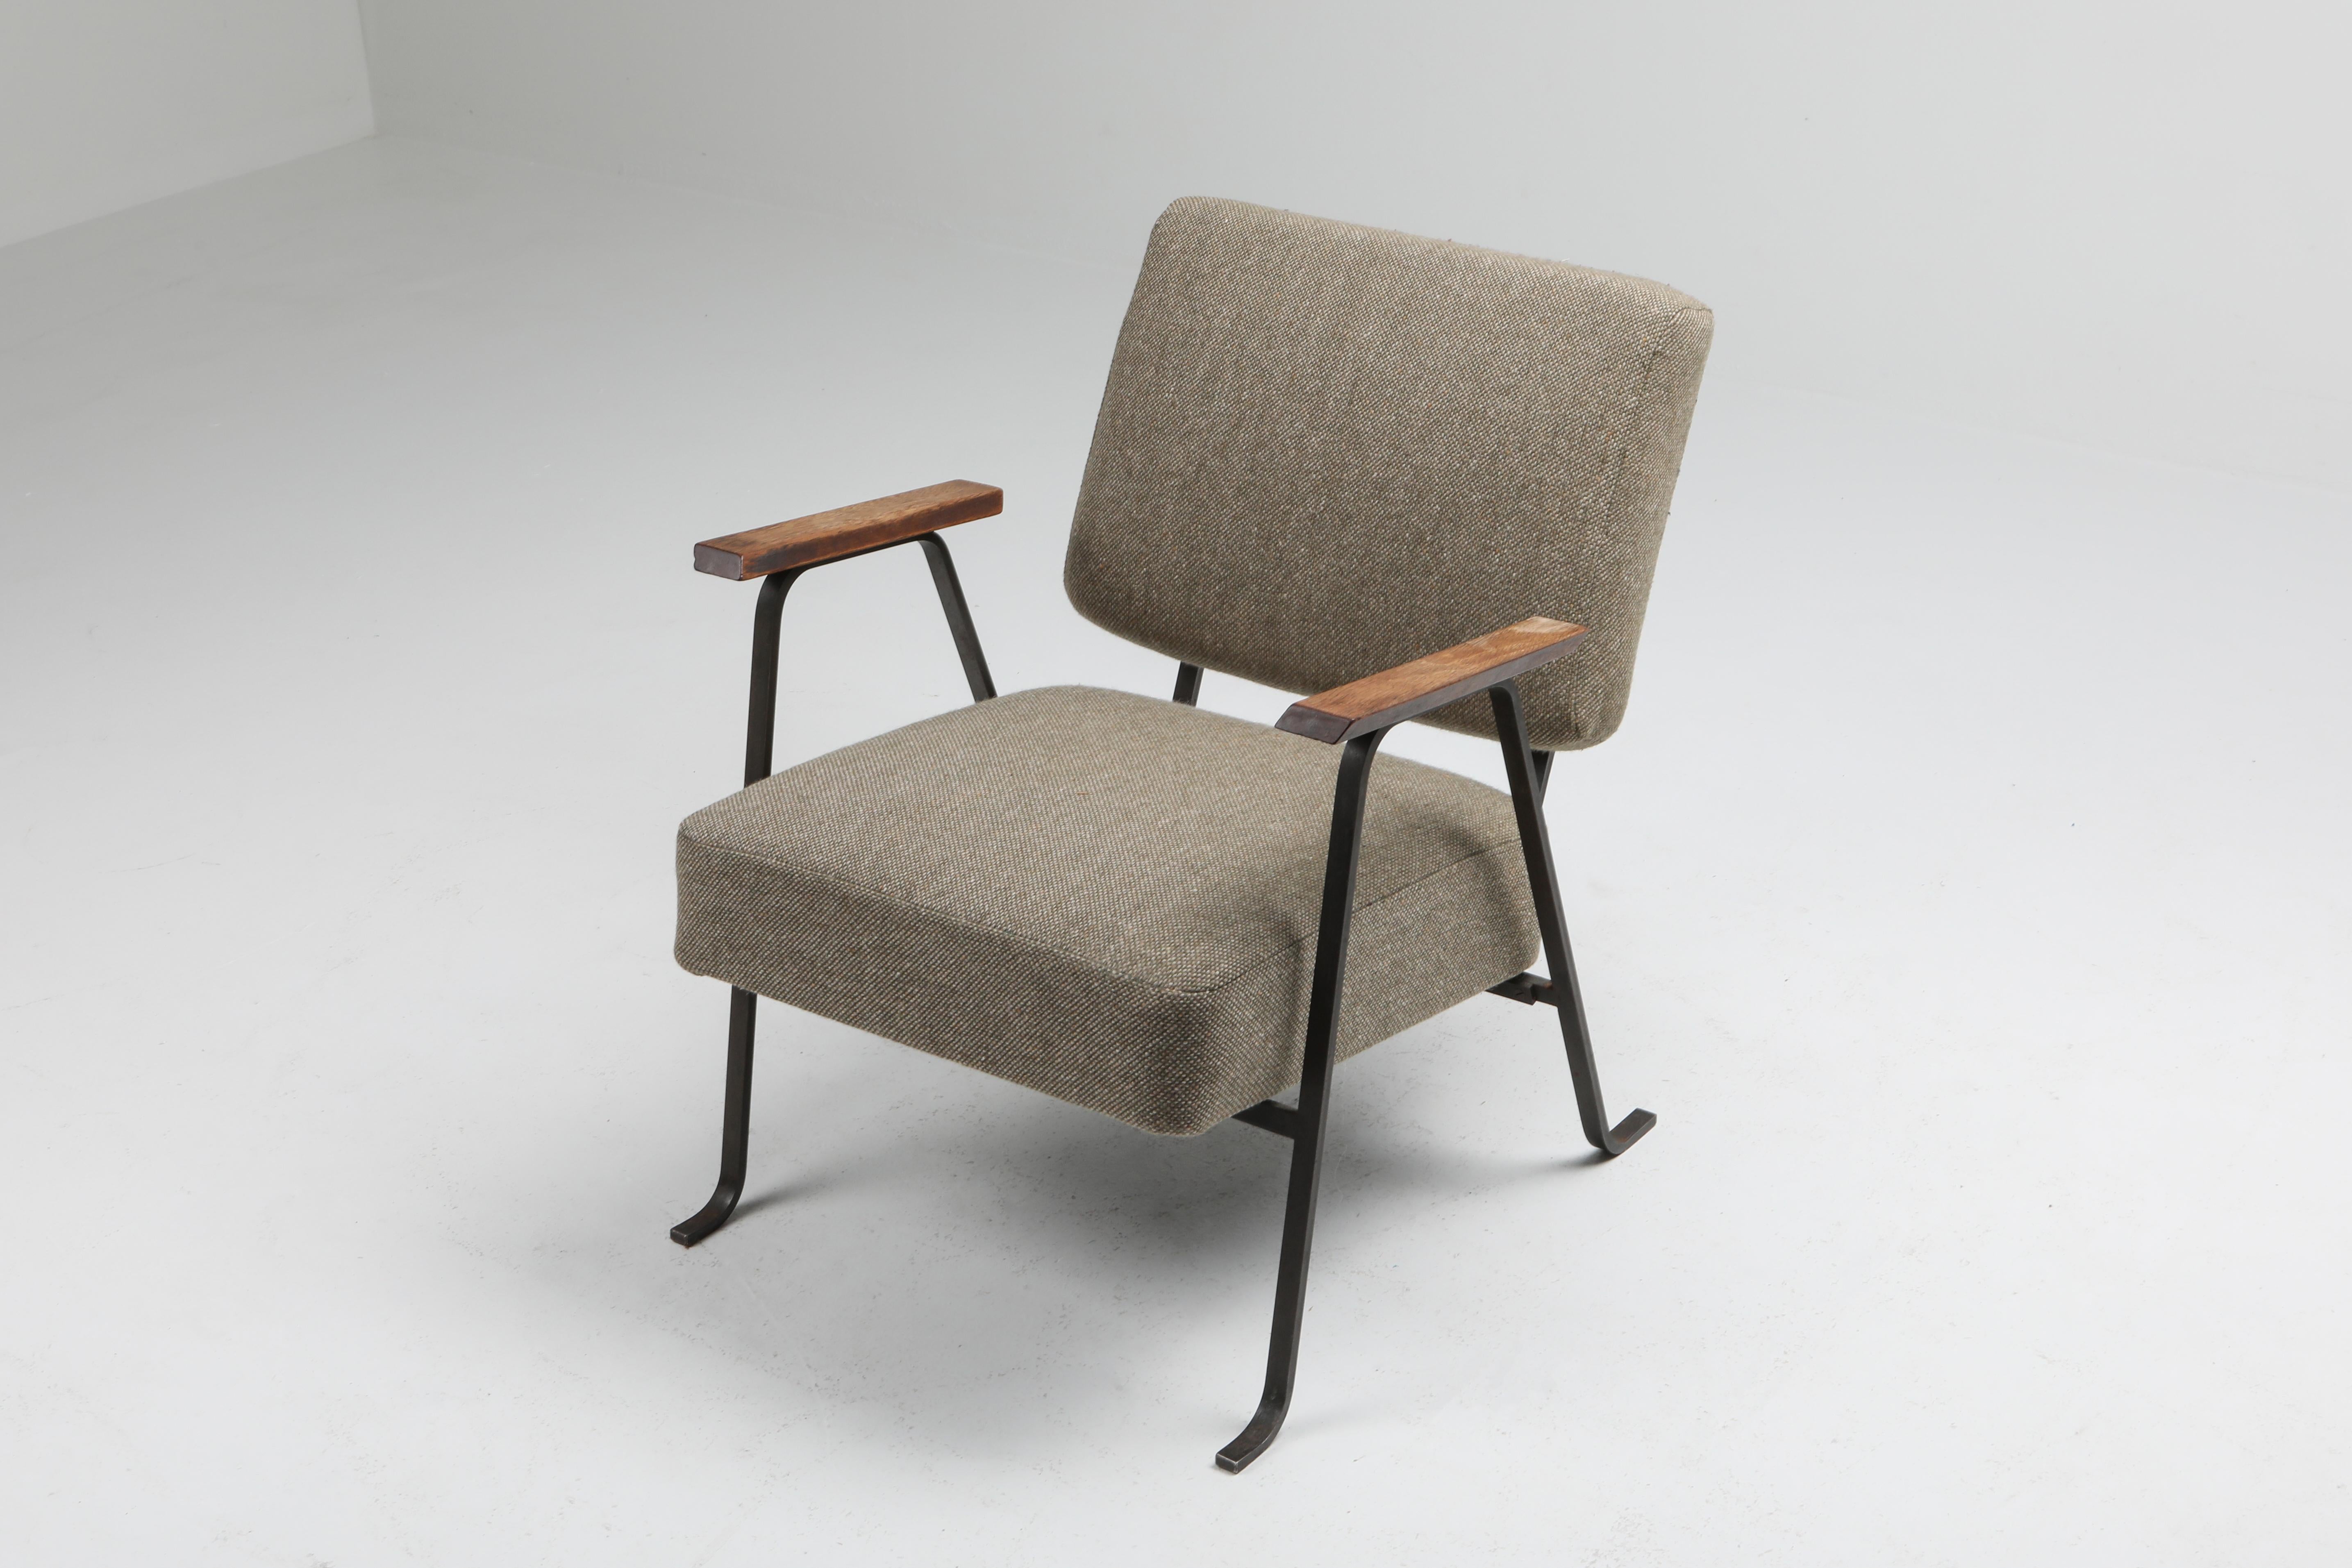 Mid-Century Modern lounge chair, AP originals model AP-5 by Architect Hein Salomonson, Dutch, 1956

Salomonson was viewed by many as the successor of Rietveld, including him.

Forged steel frame, solid wood armrest, Kvadrat fabric.
             